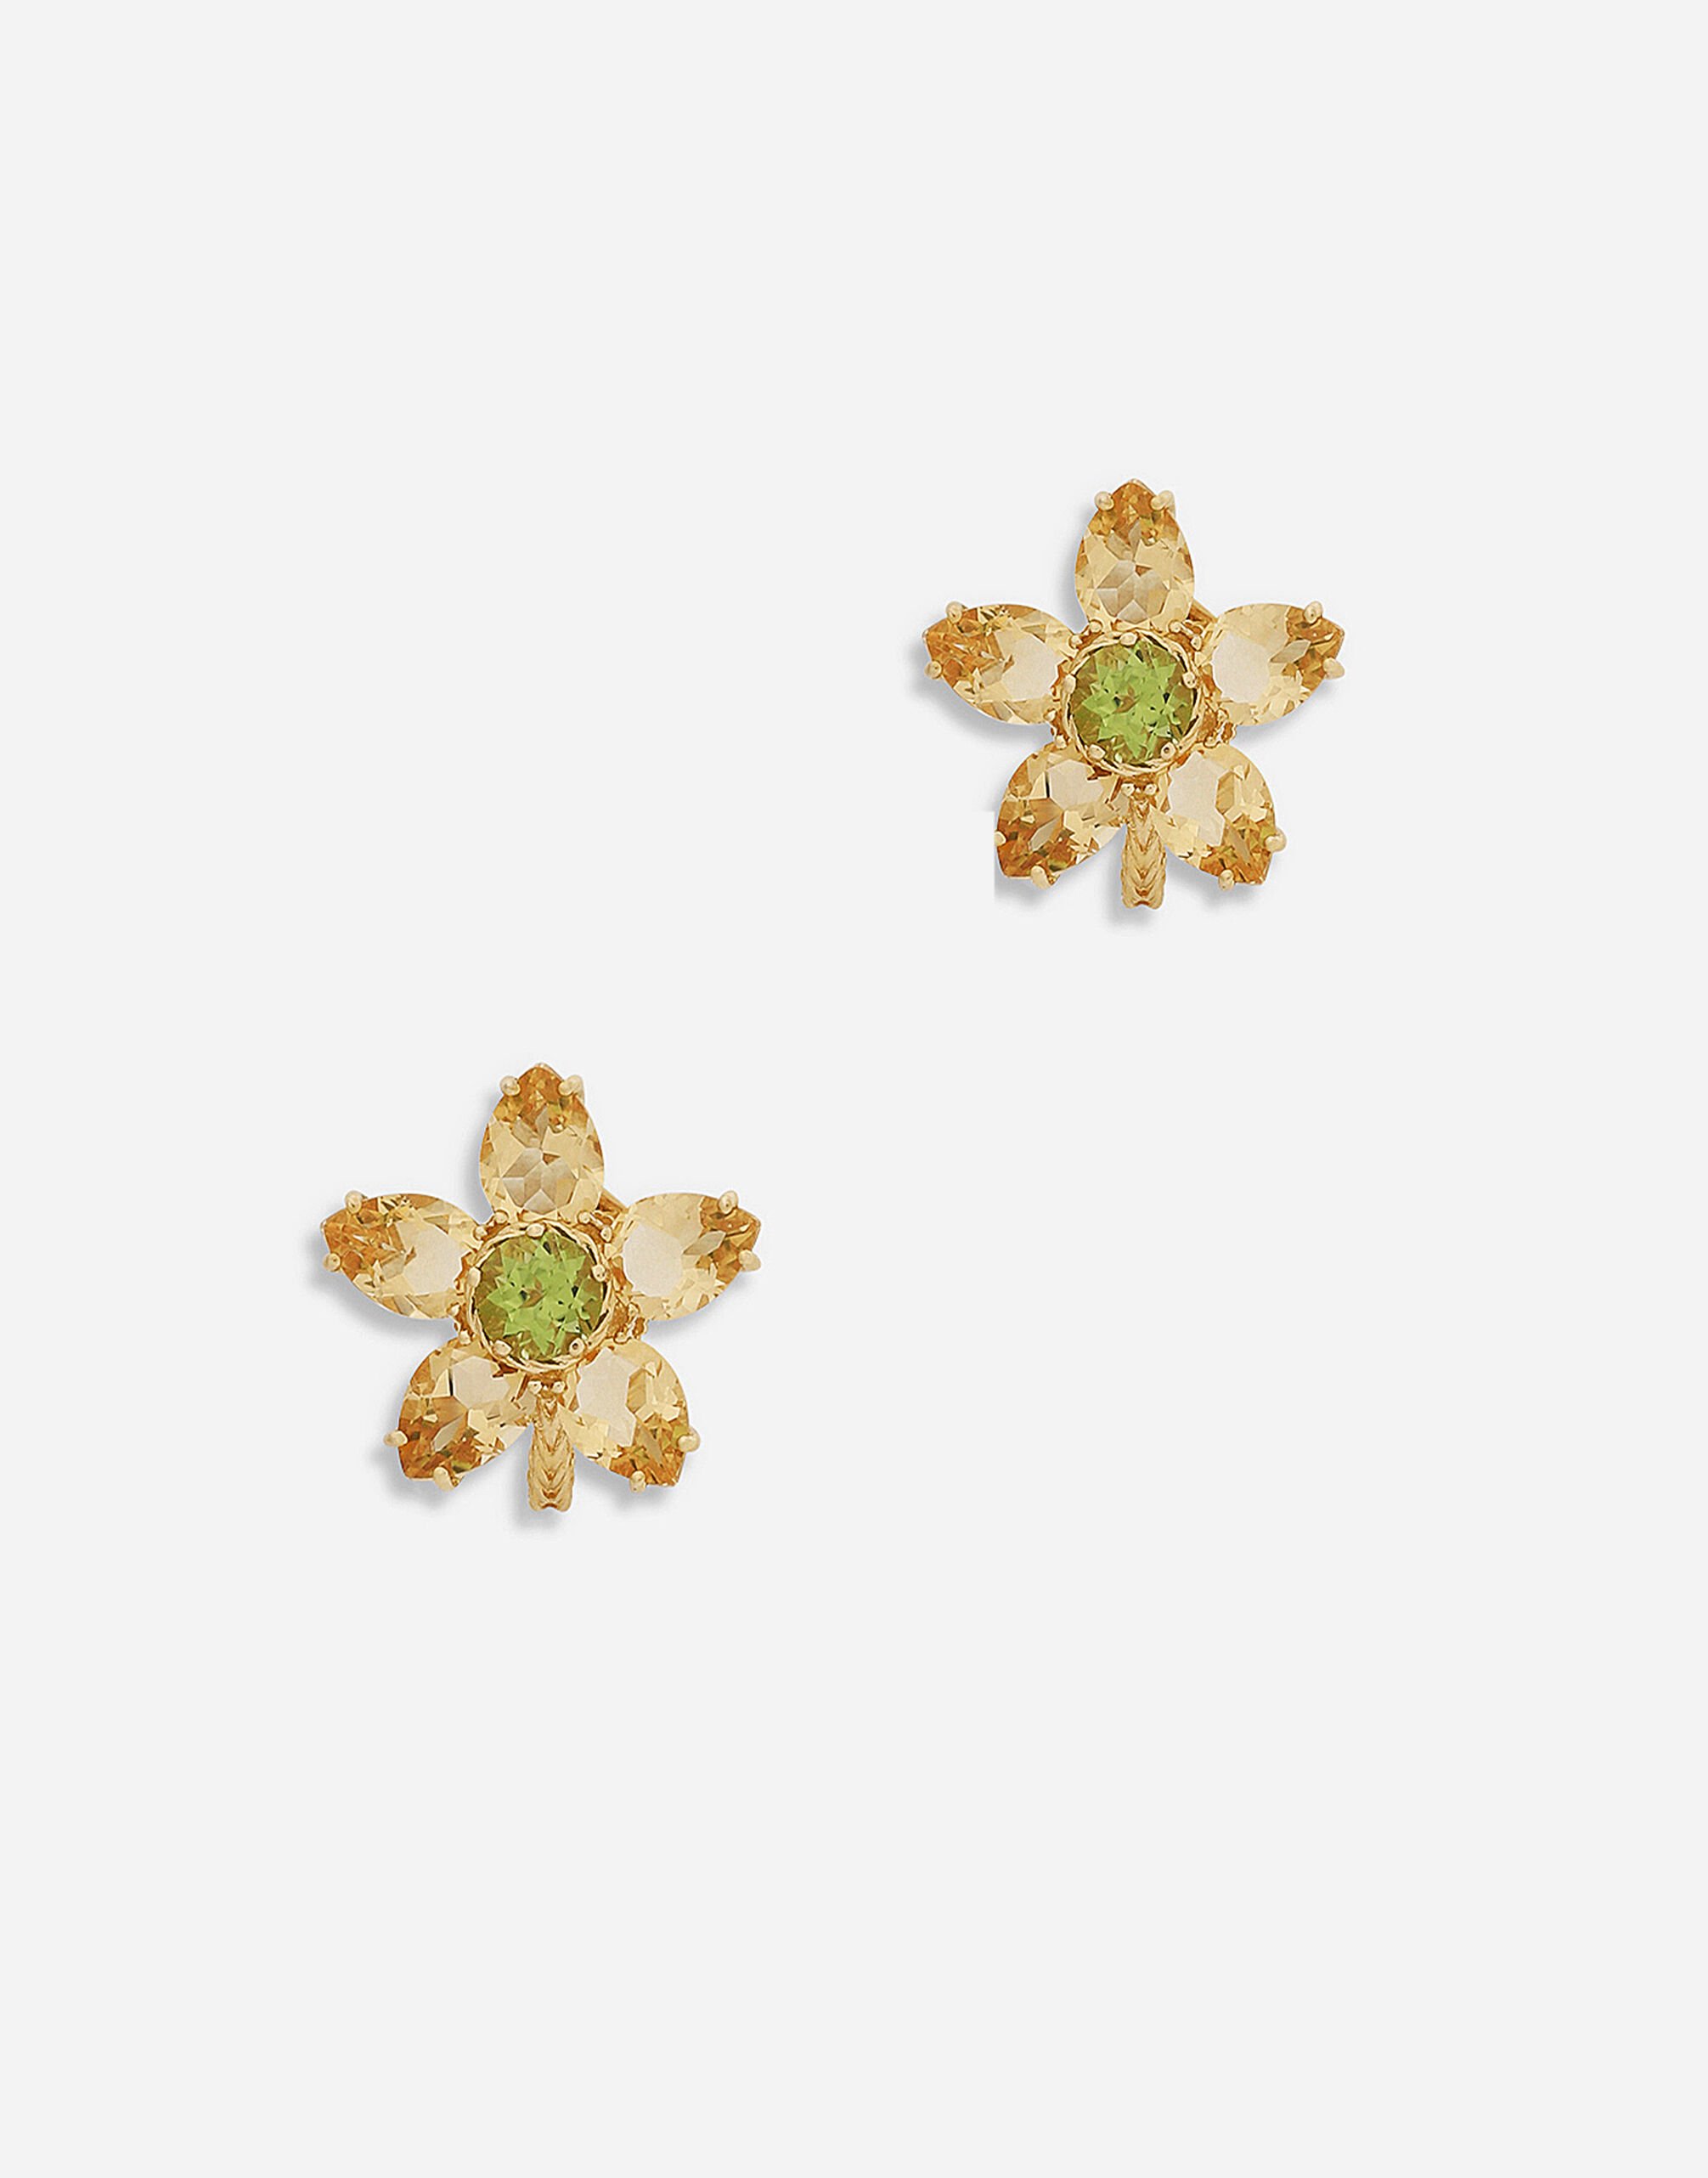 Dolce & Gabbana Spring earrings in yellow 18kt gold with citrine flower motif Gold WFHK2GWSAPB